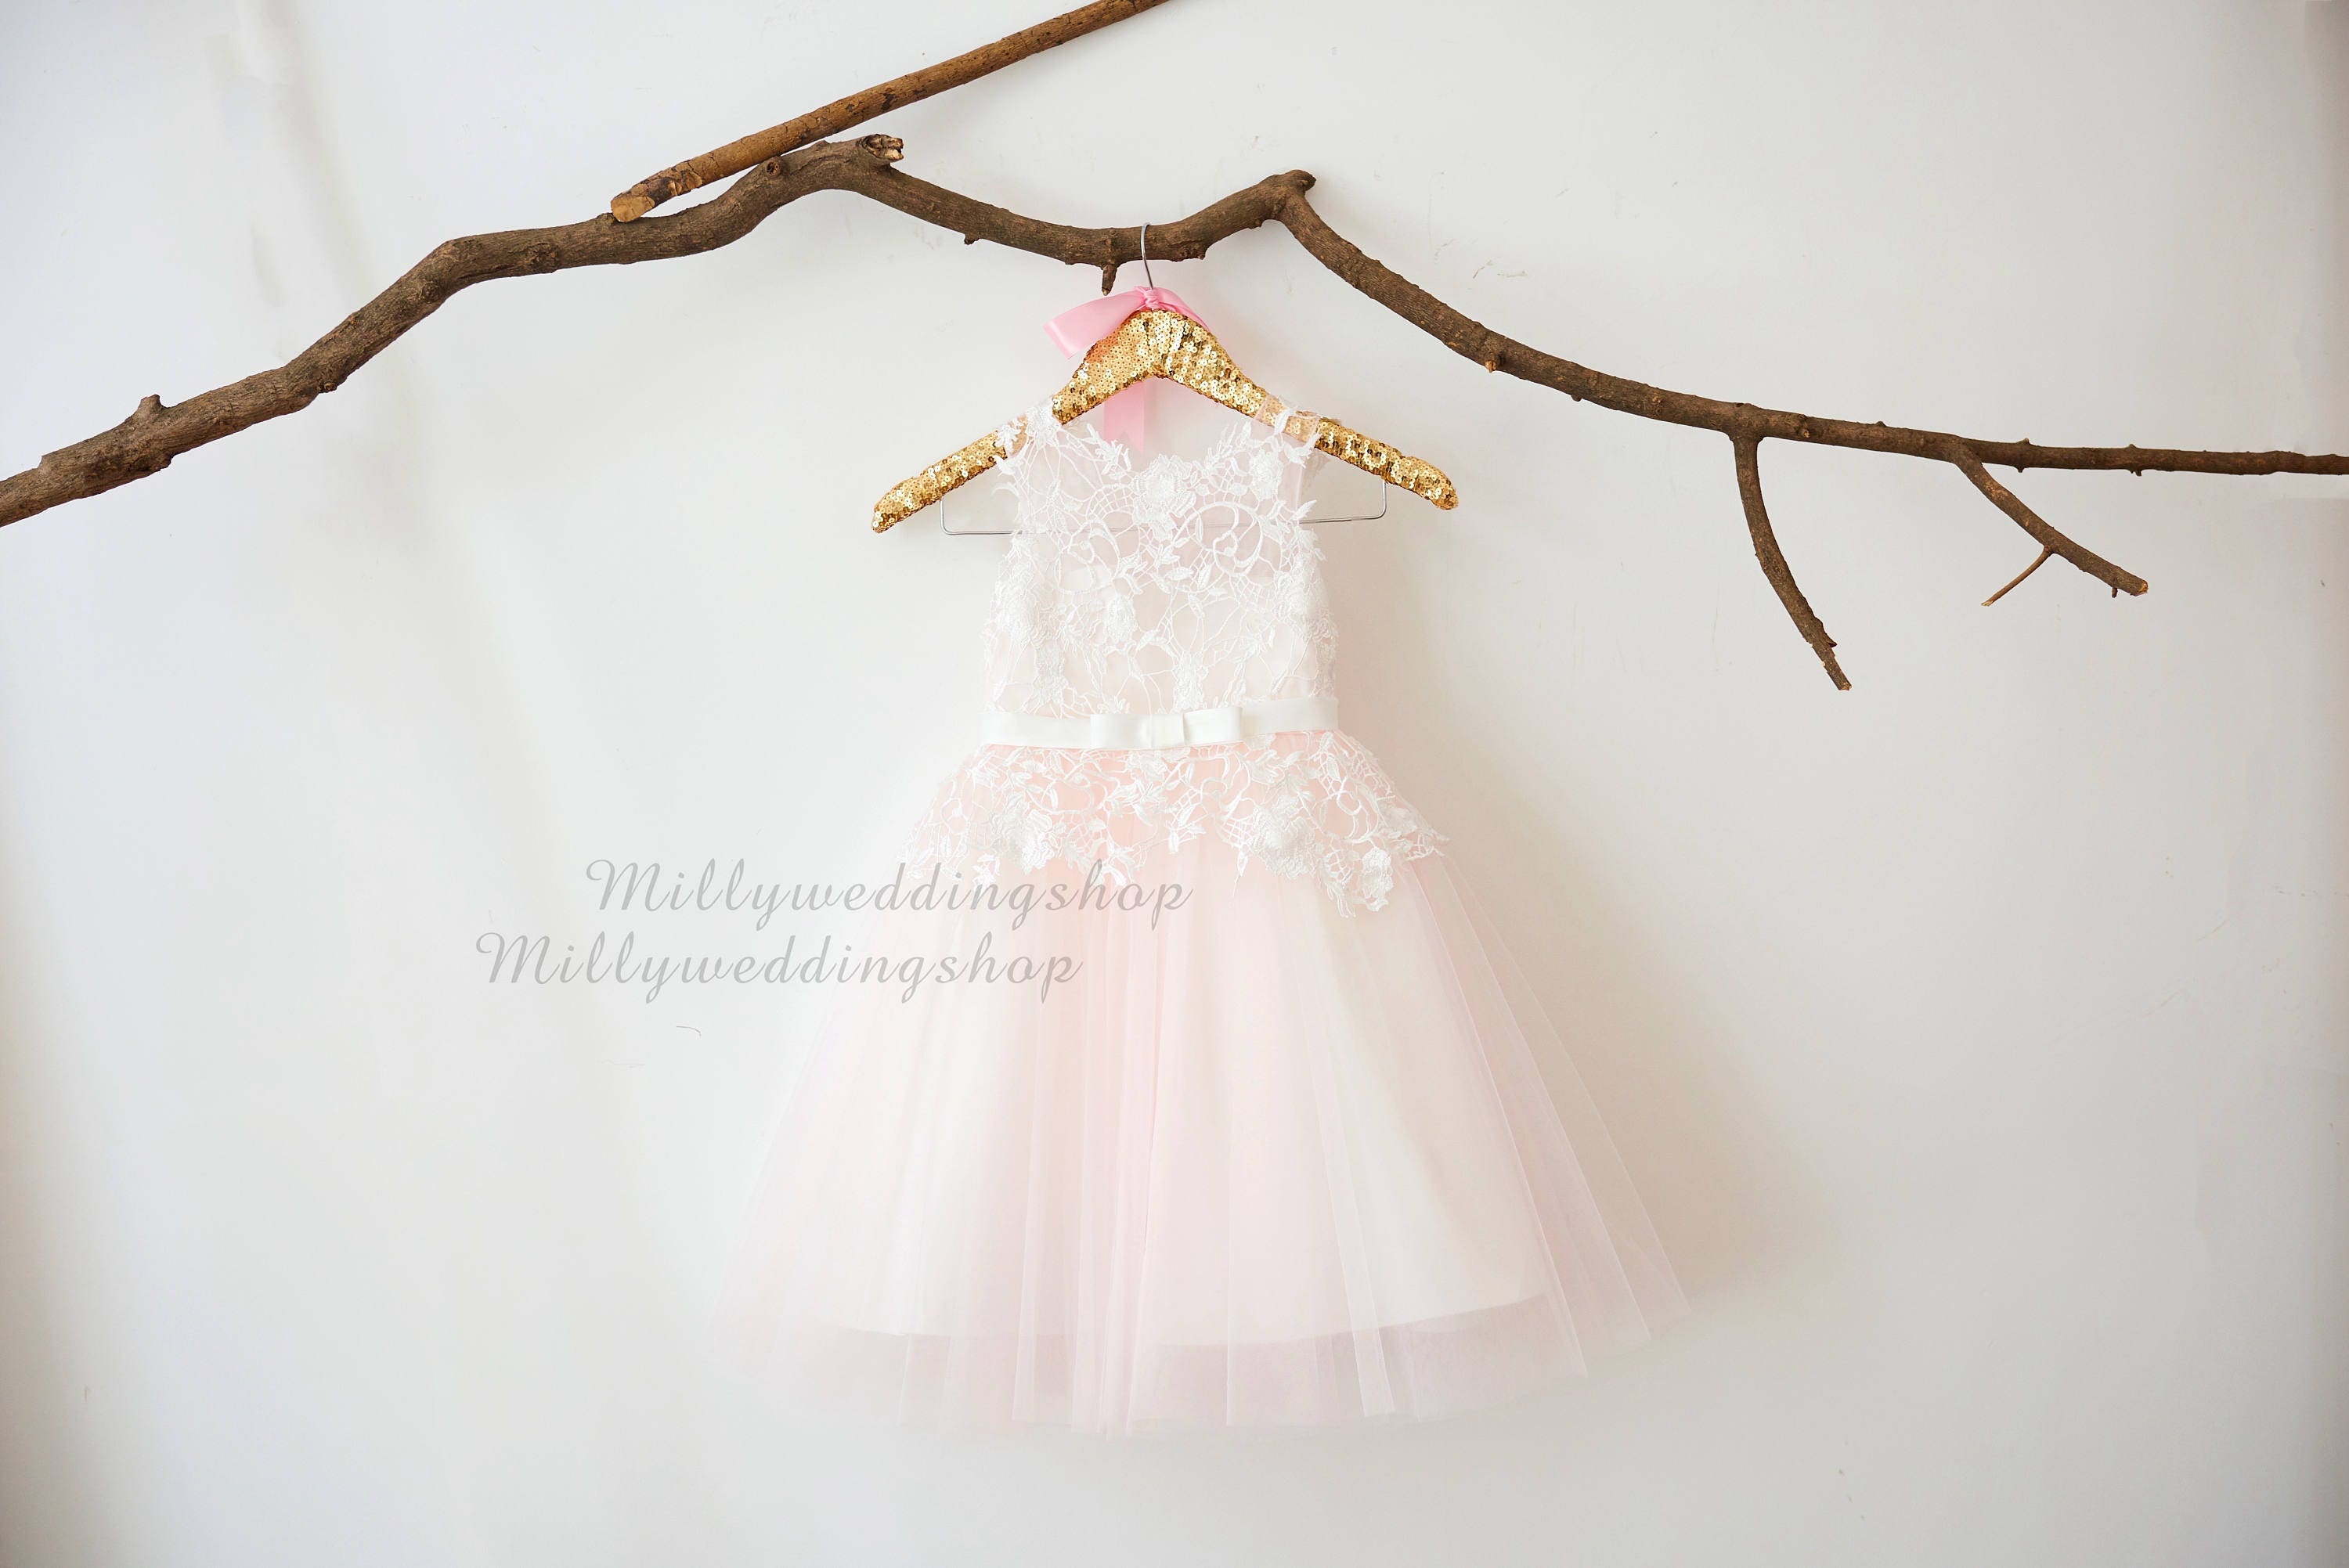 Ivory Lace Pale Pink Tulle Flower Girl Dress Wedding - Etsy